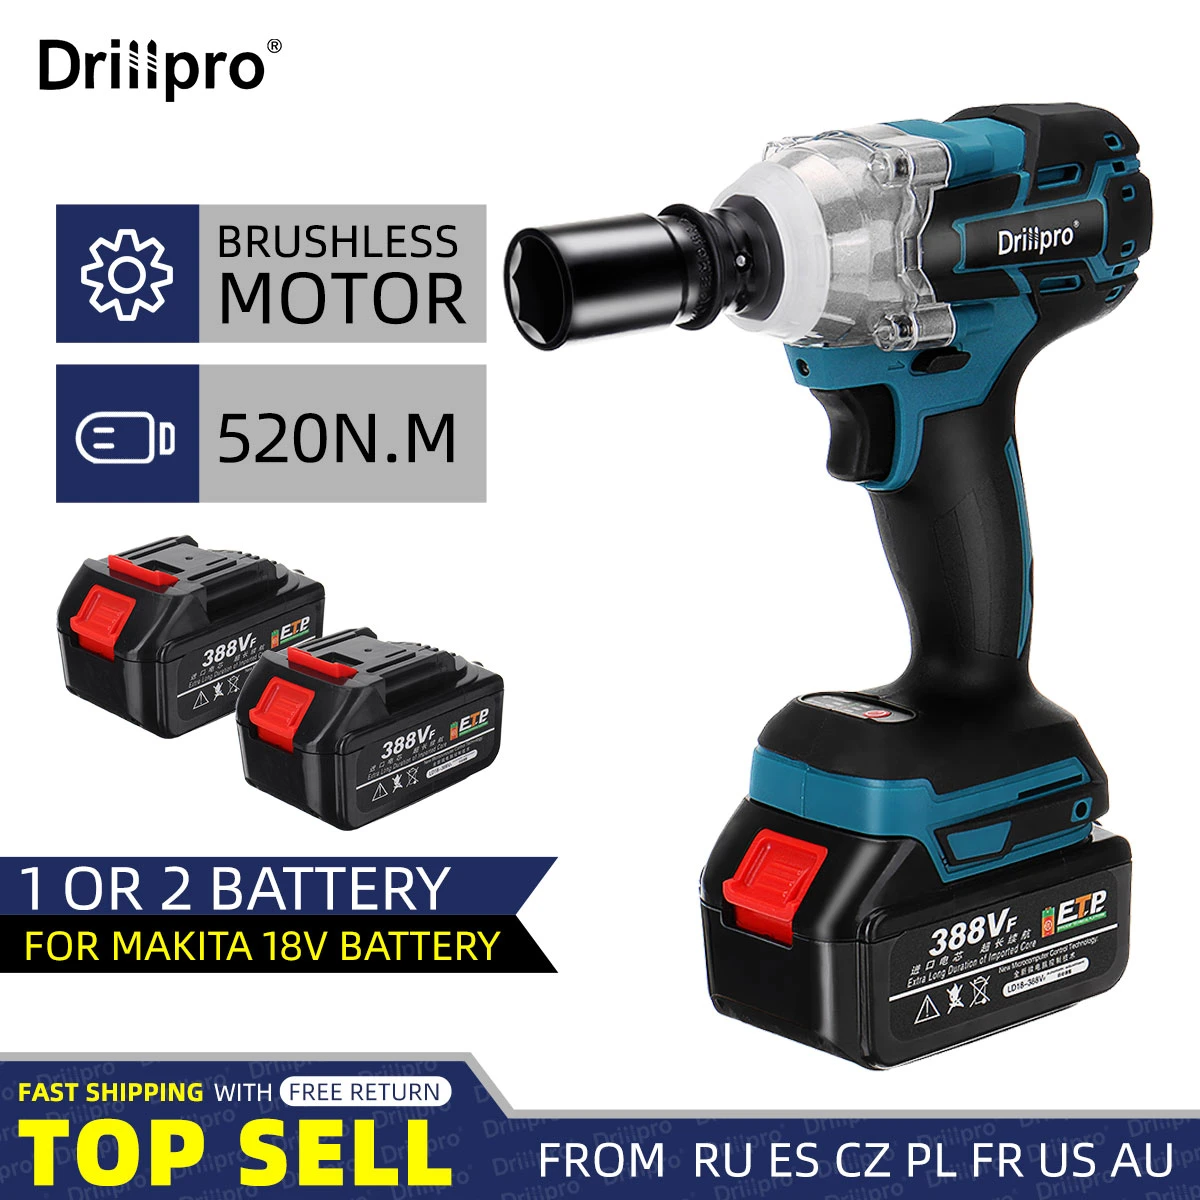 Drillpro 388VF Brushless Cordless Electric Impact Wrench Power Tools 3000mAh Battery +Sleeve Adapt to Makita 18V battery